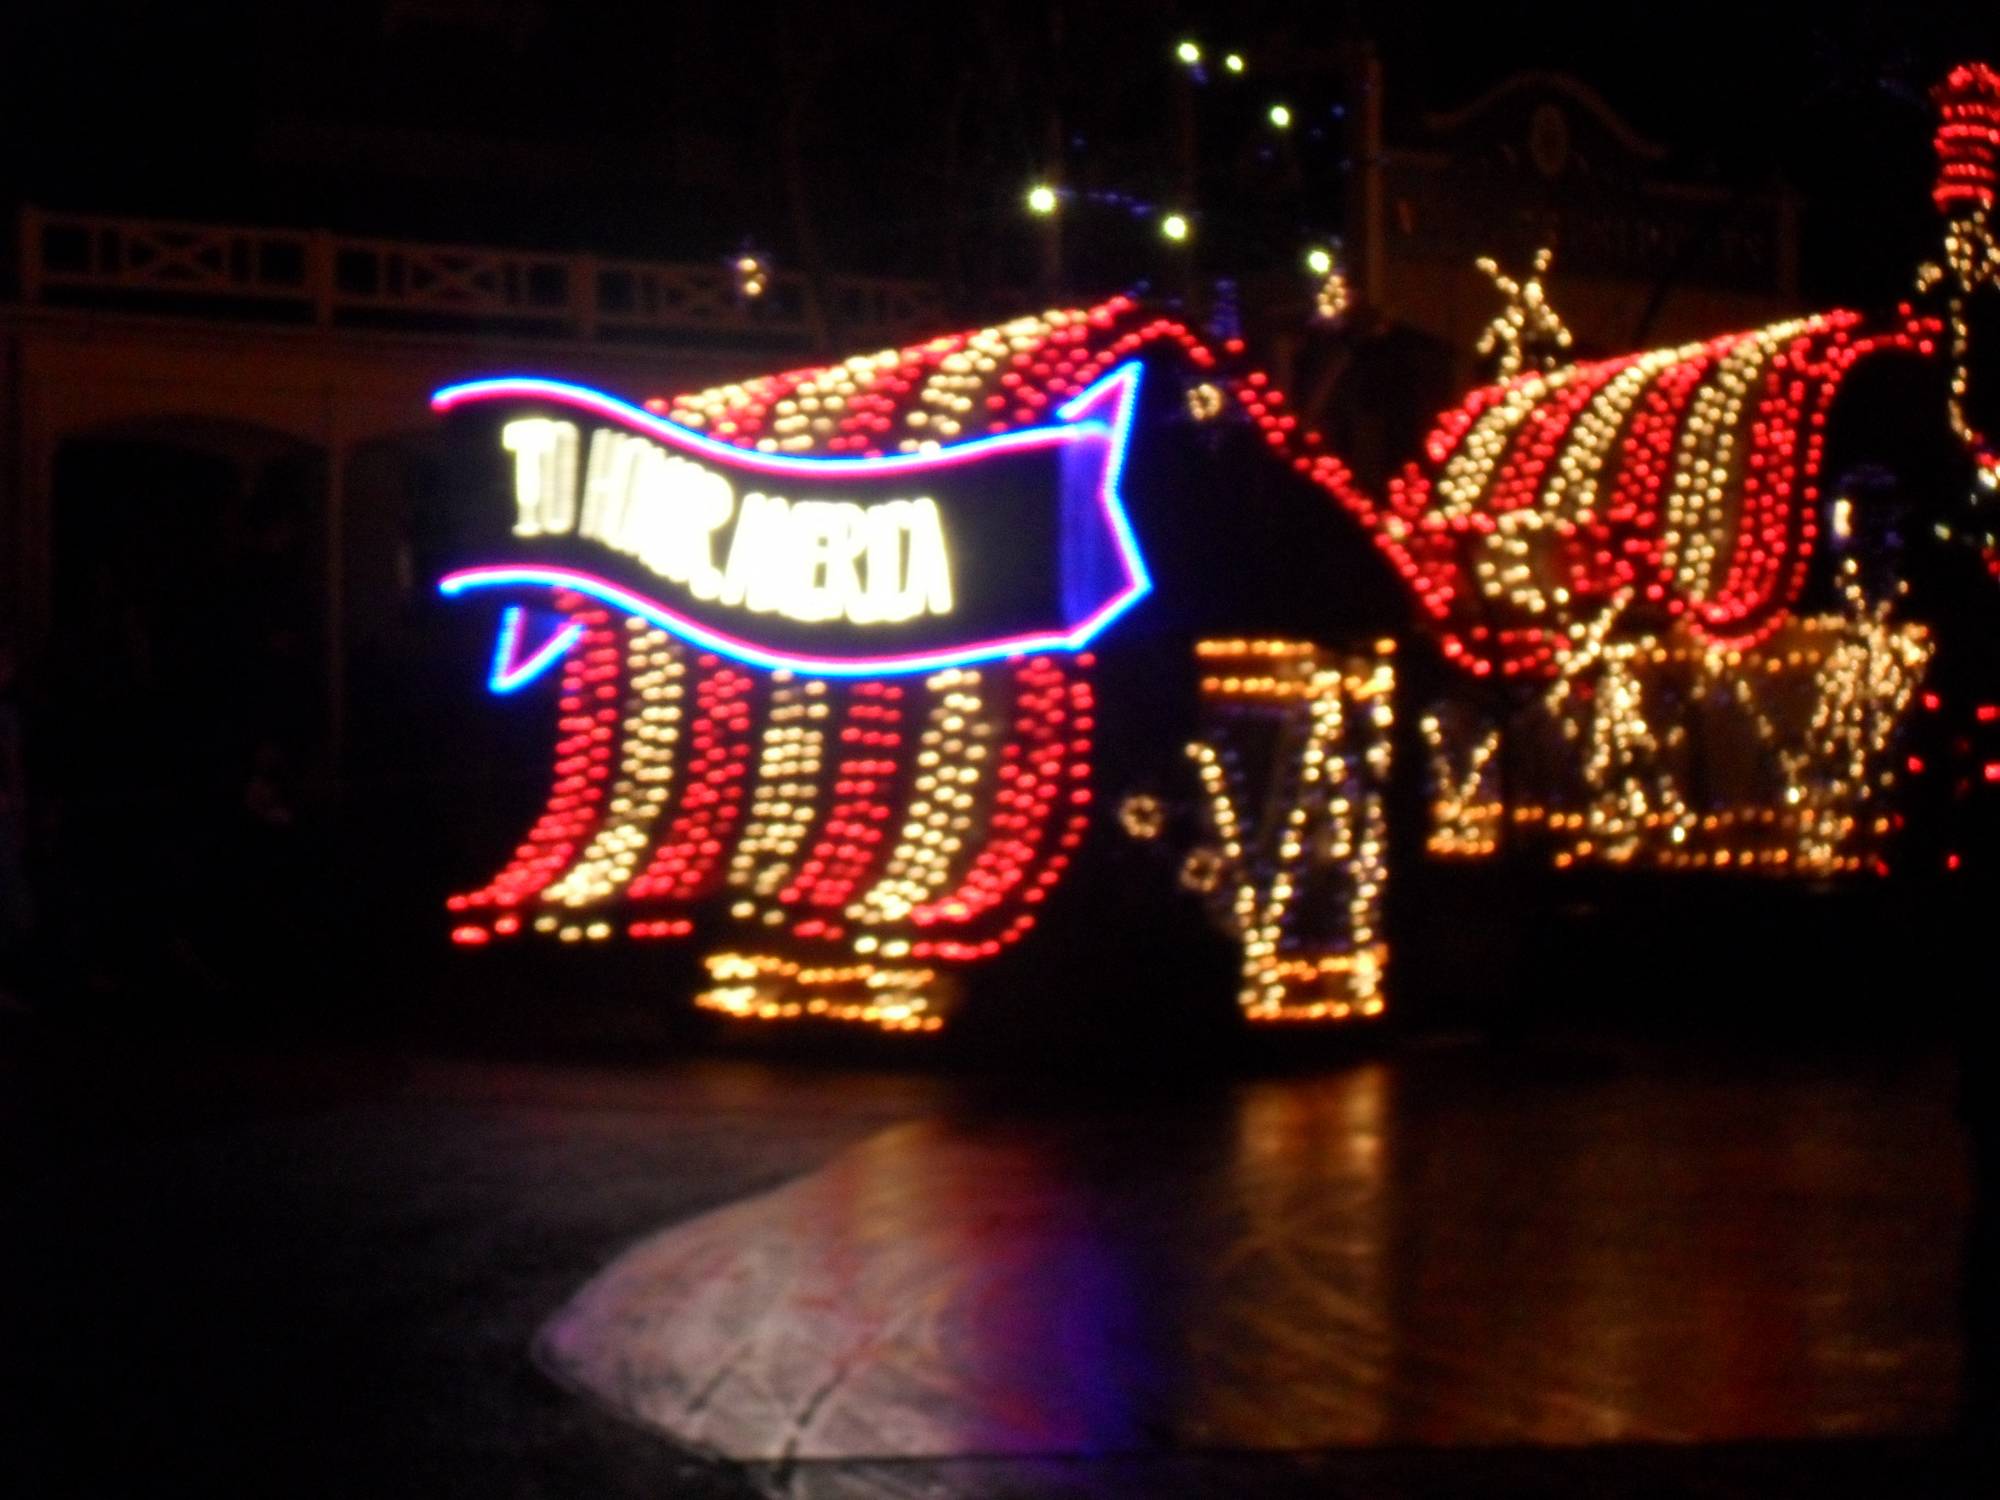 Main Street Electrical Parade - America Float